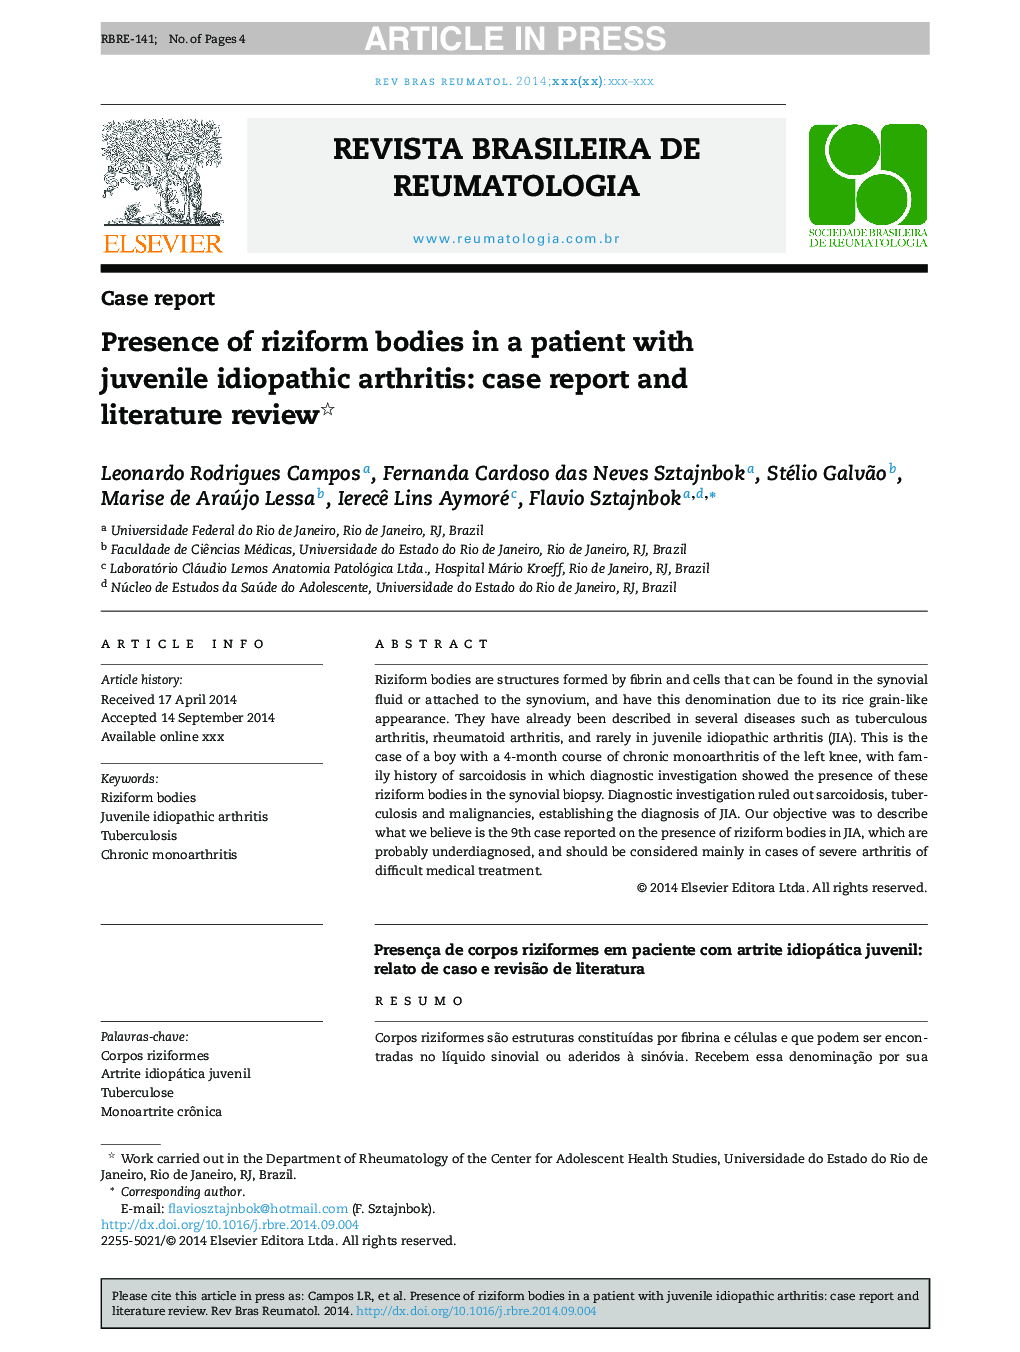 Presence of riziform bodies in a patient with juvenile idiopathic arthritis: case report and literature review